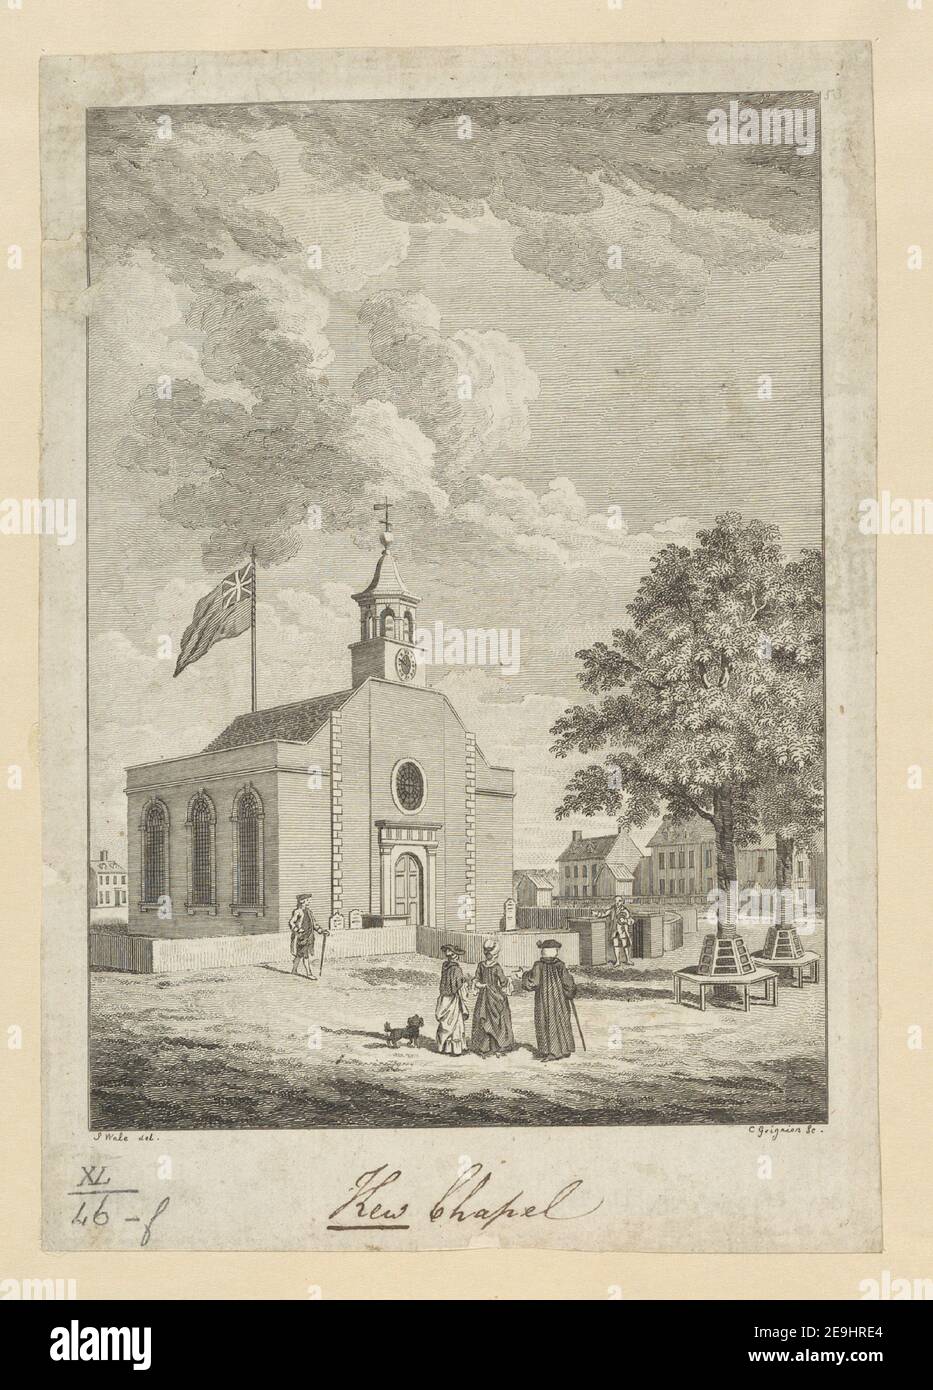 St. Anne's, Kew   Author  Grignion, Charles 40.46.f. Place of publication: [London] Publisher: [unknown publisher] Date of publication: [1770-1786]  Item type: 1 print Medium: etching Dimensions: platemark 20.8 x 14.0 cm  Former owner: George III, King of Great Britain, 1738-1820 Stock Photo